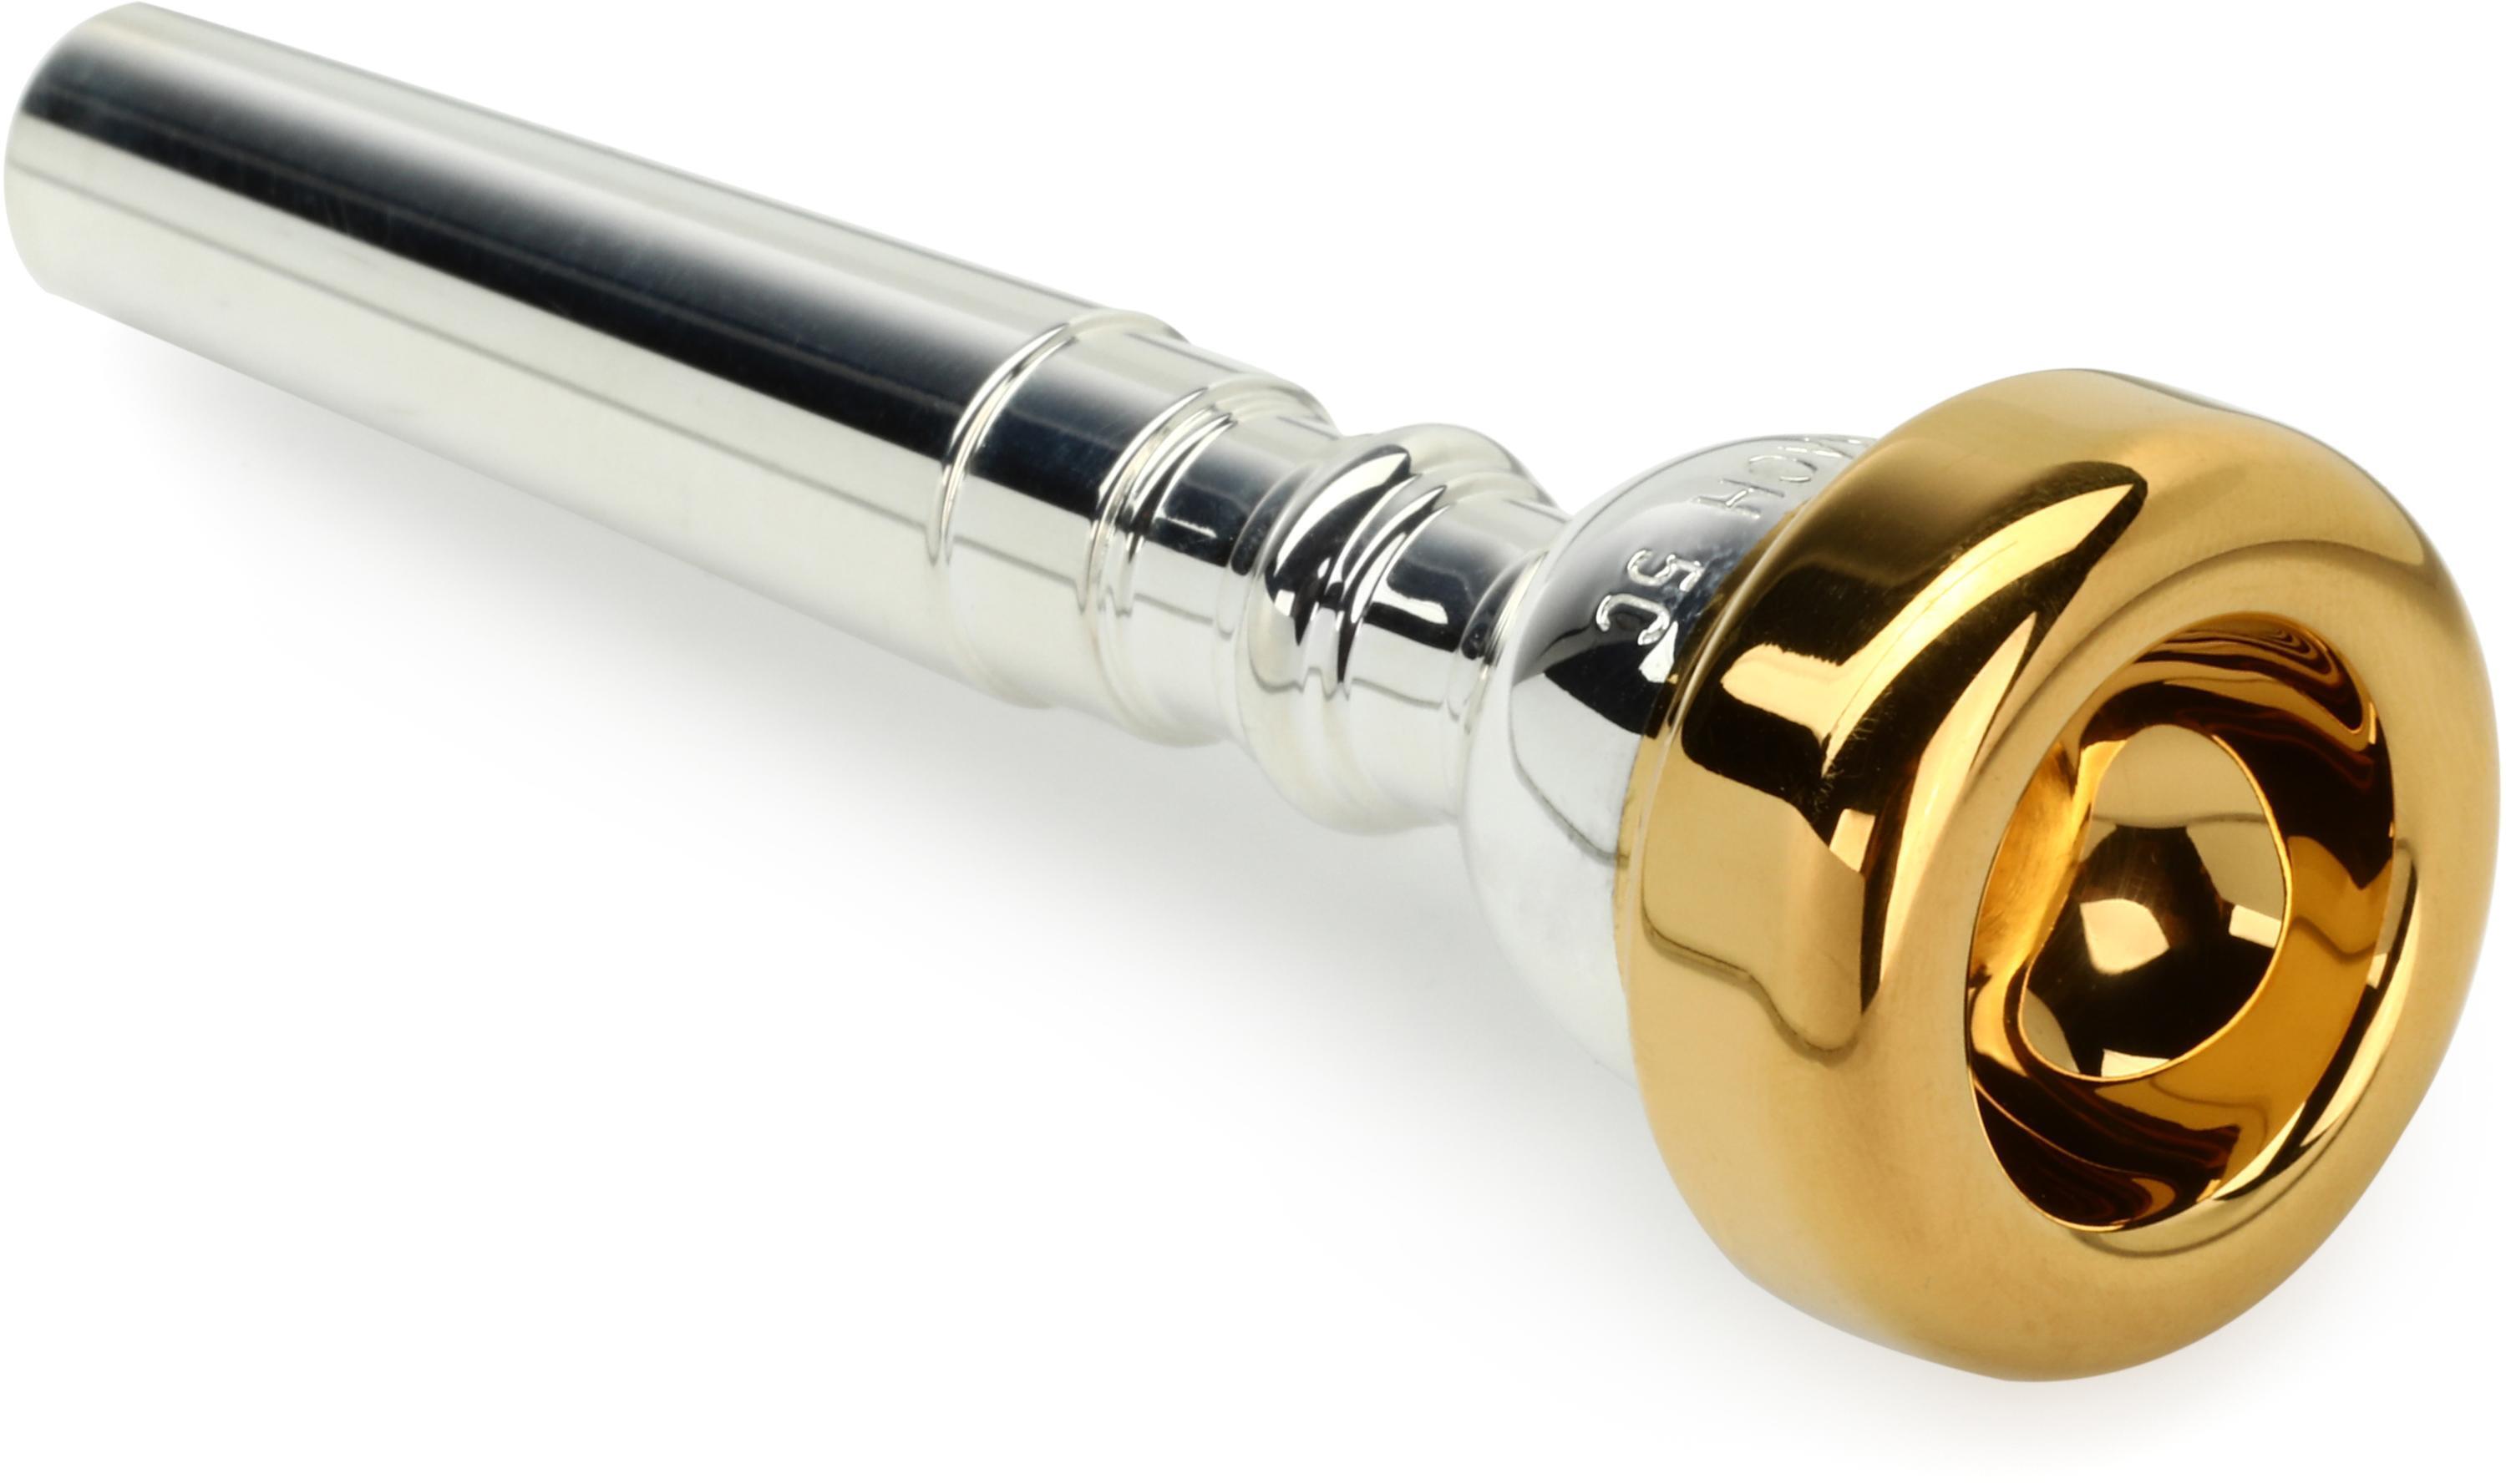 Bach 351 Classic Series Silver-plated Trumpet Mouthpiece with Gold